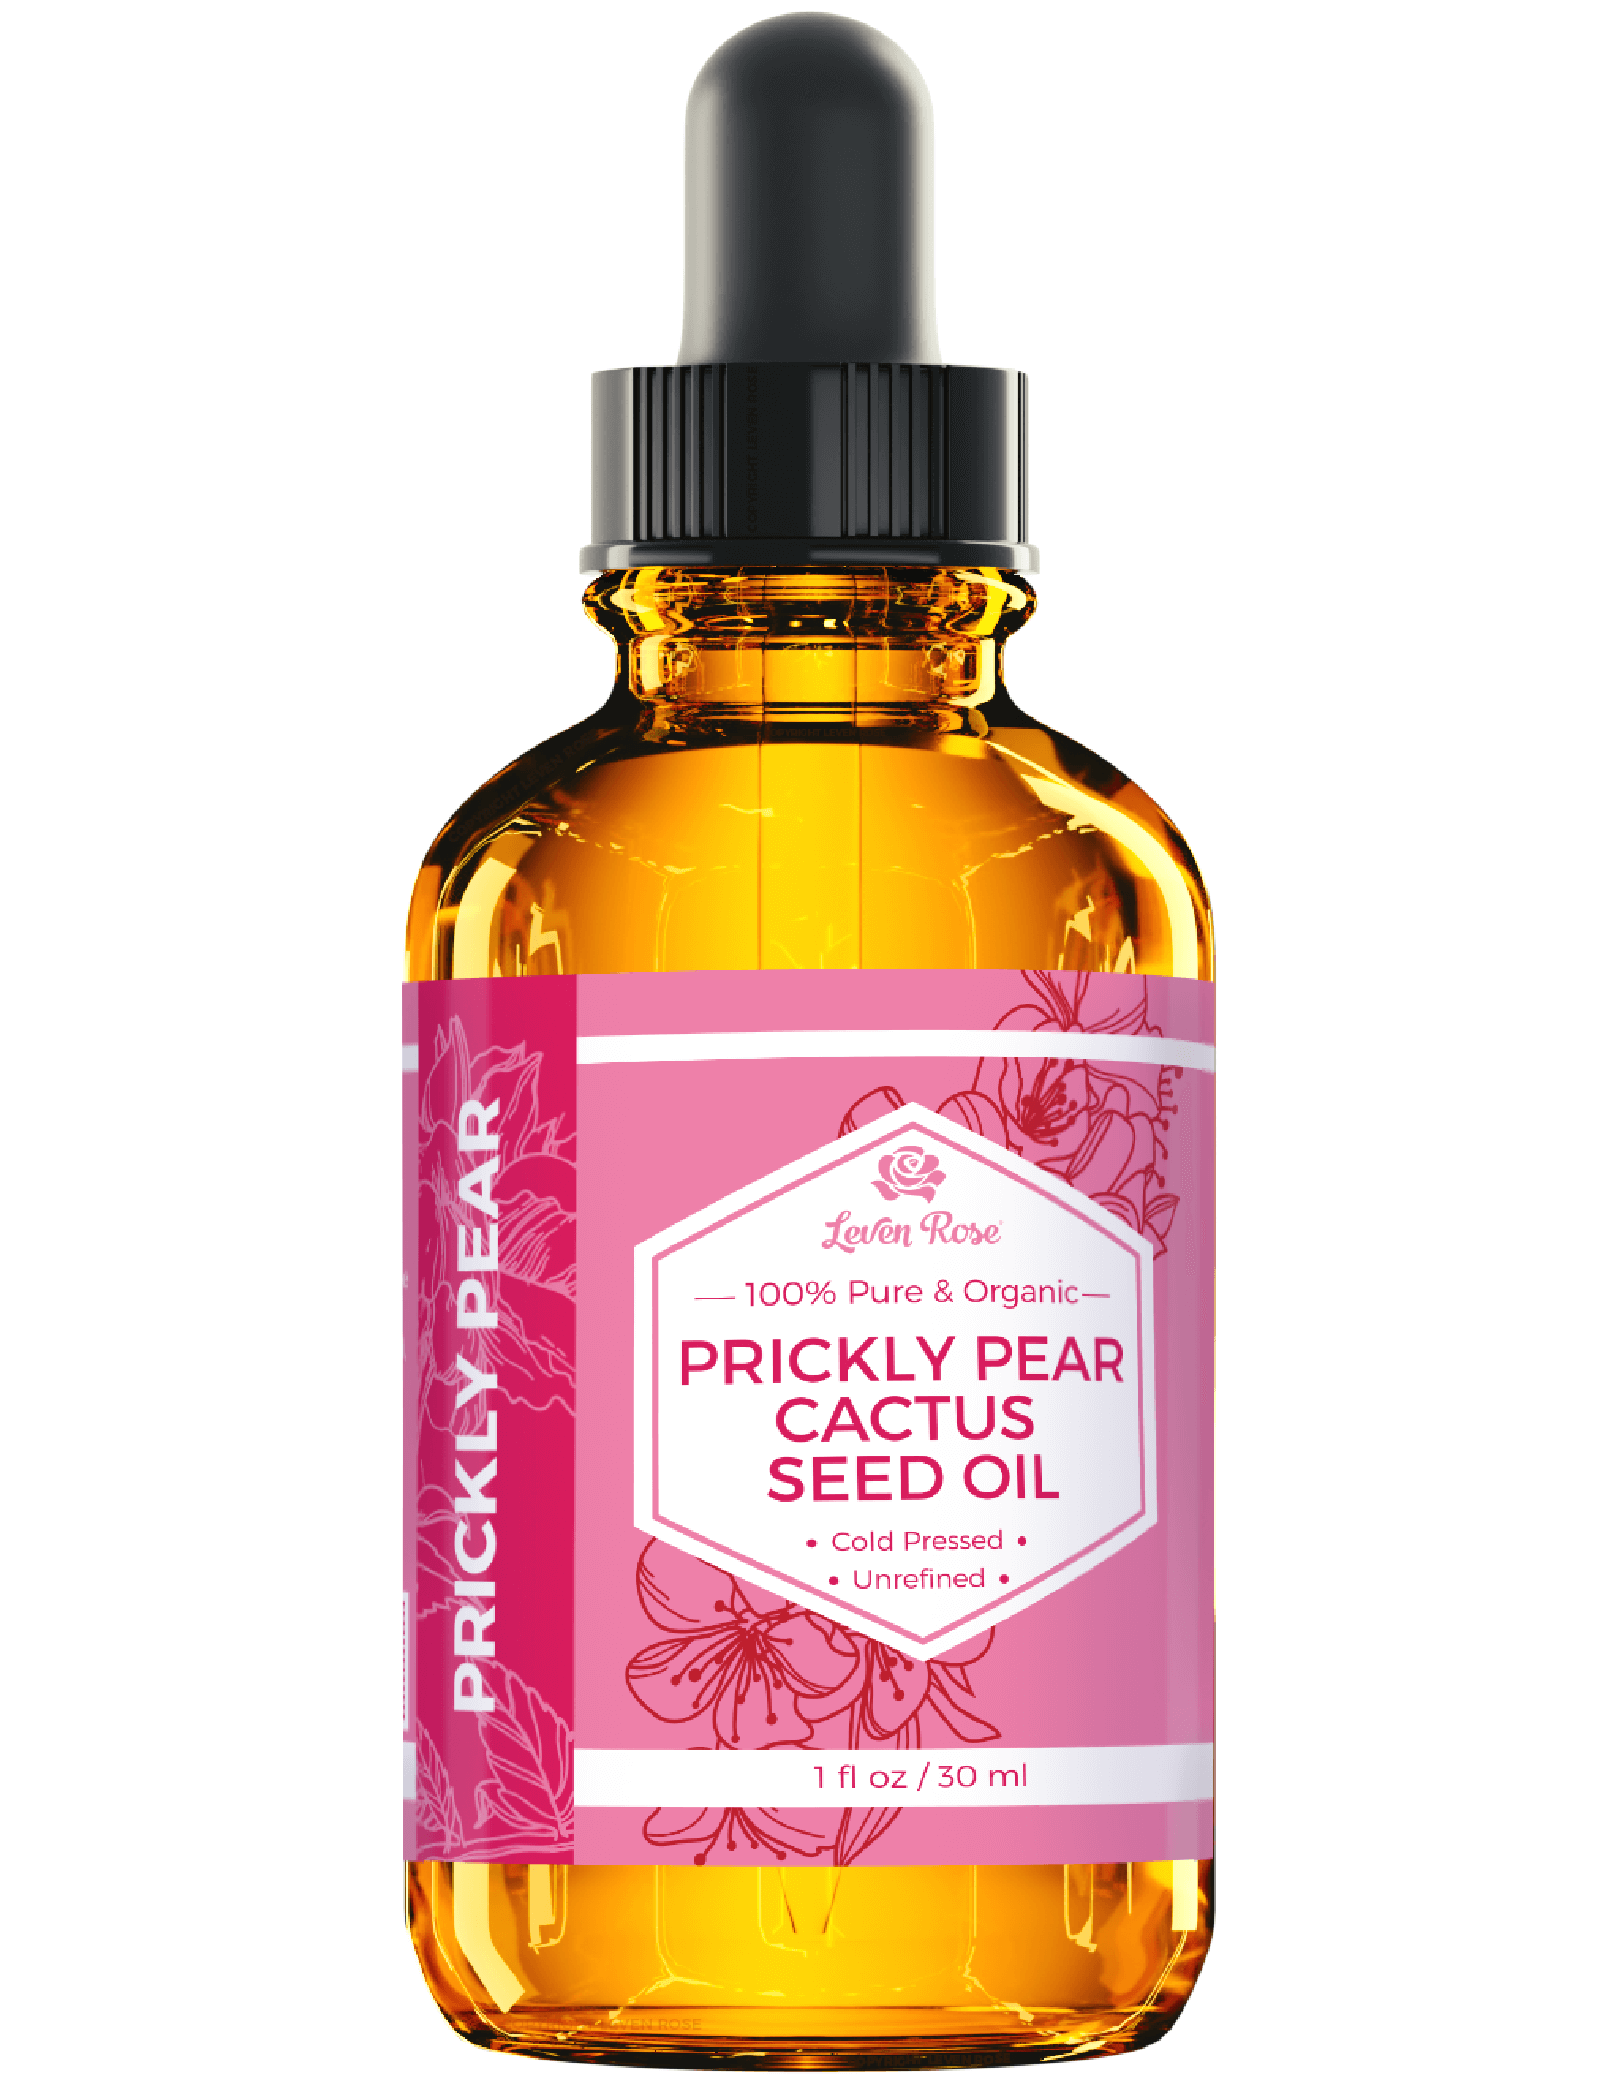 Benefits of Prickly Pear Seed Oil for Your Skin